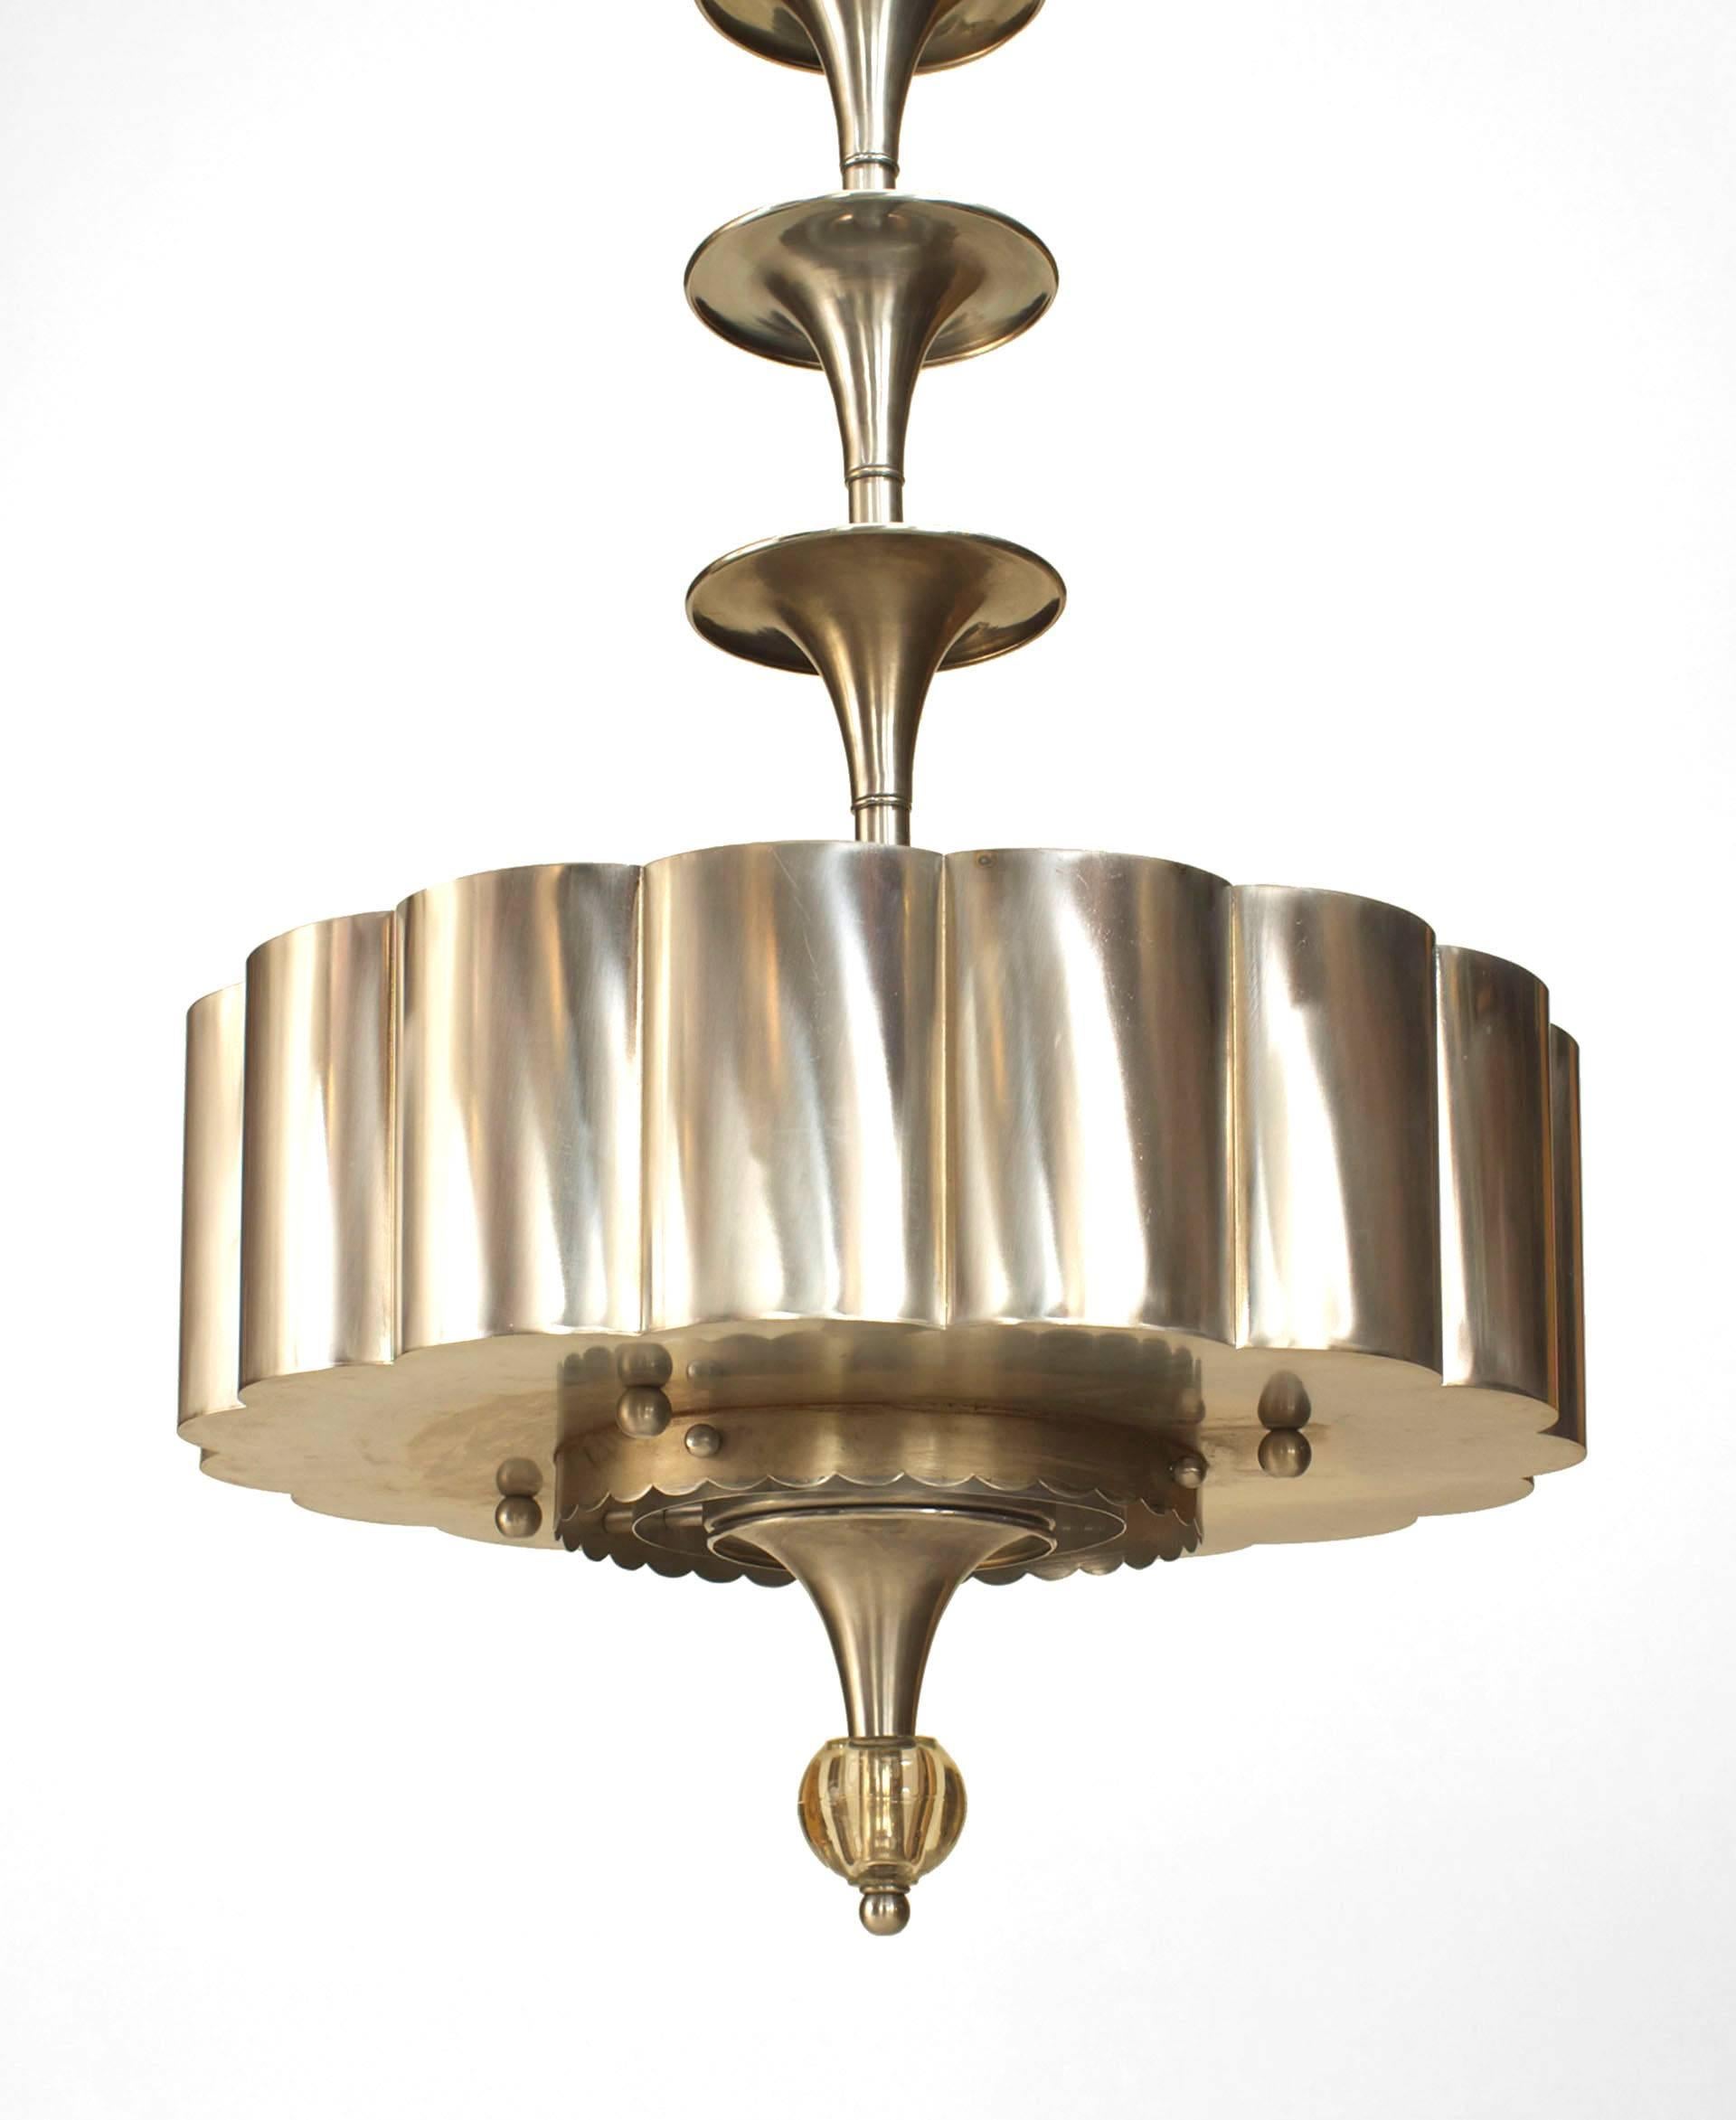 American Art Moderne (20th Century ) chrome 6 tier chandelier with fluted round bottom
